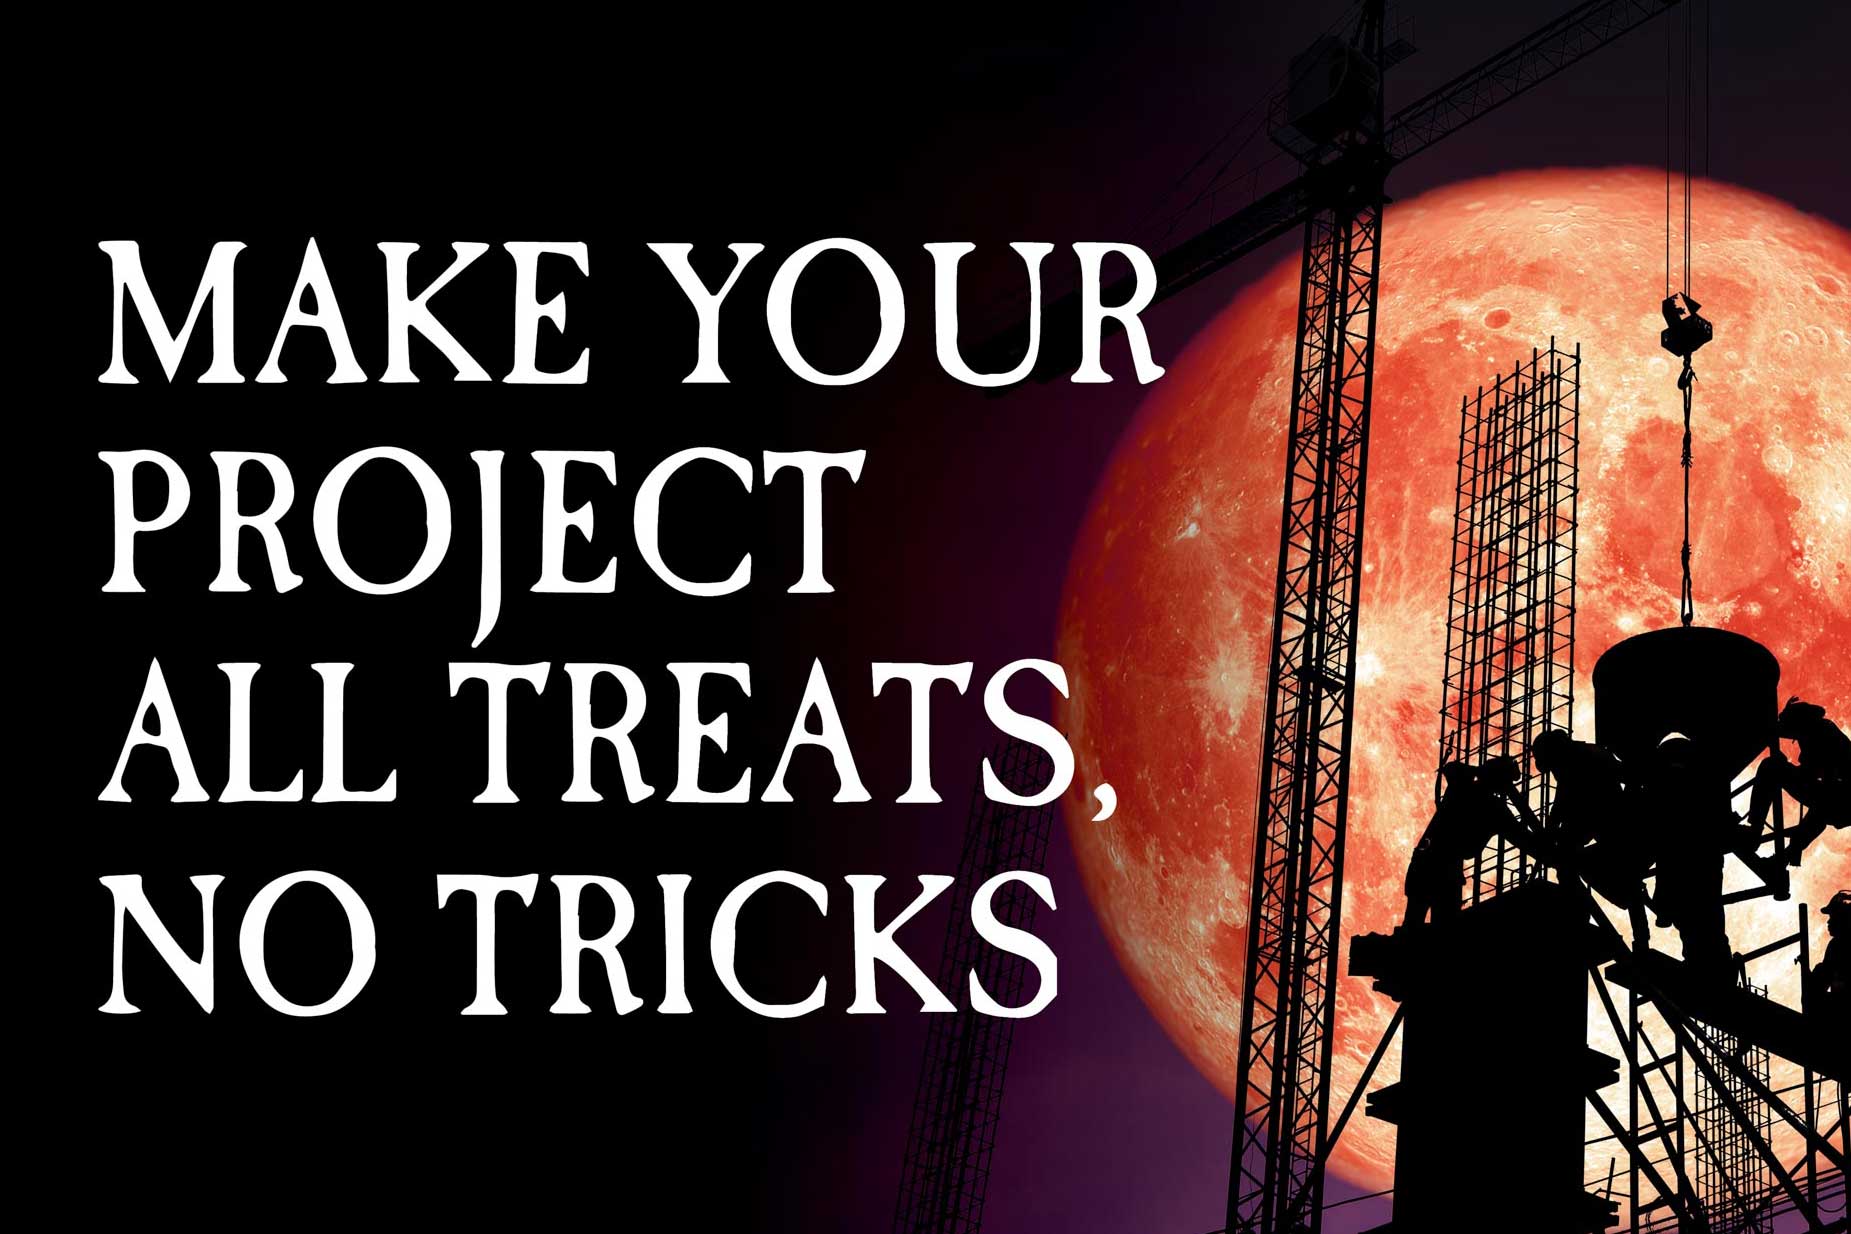 Make Your Project All Treats, No Tricks